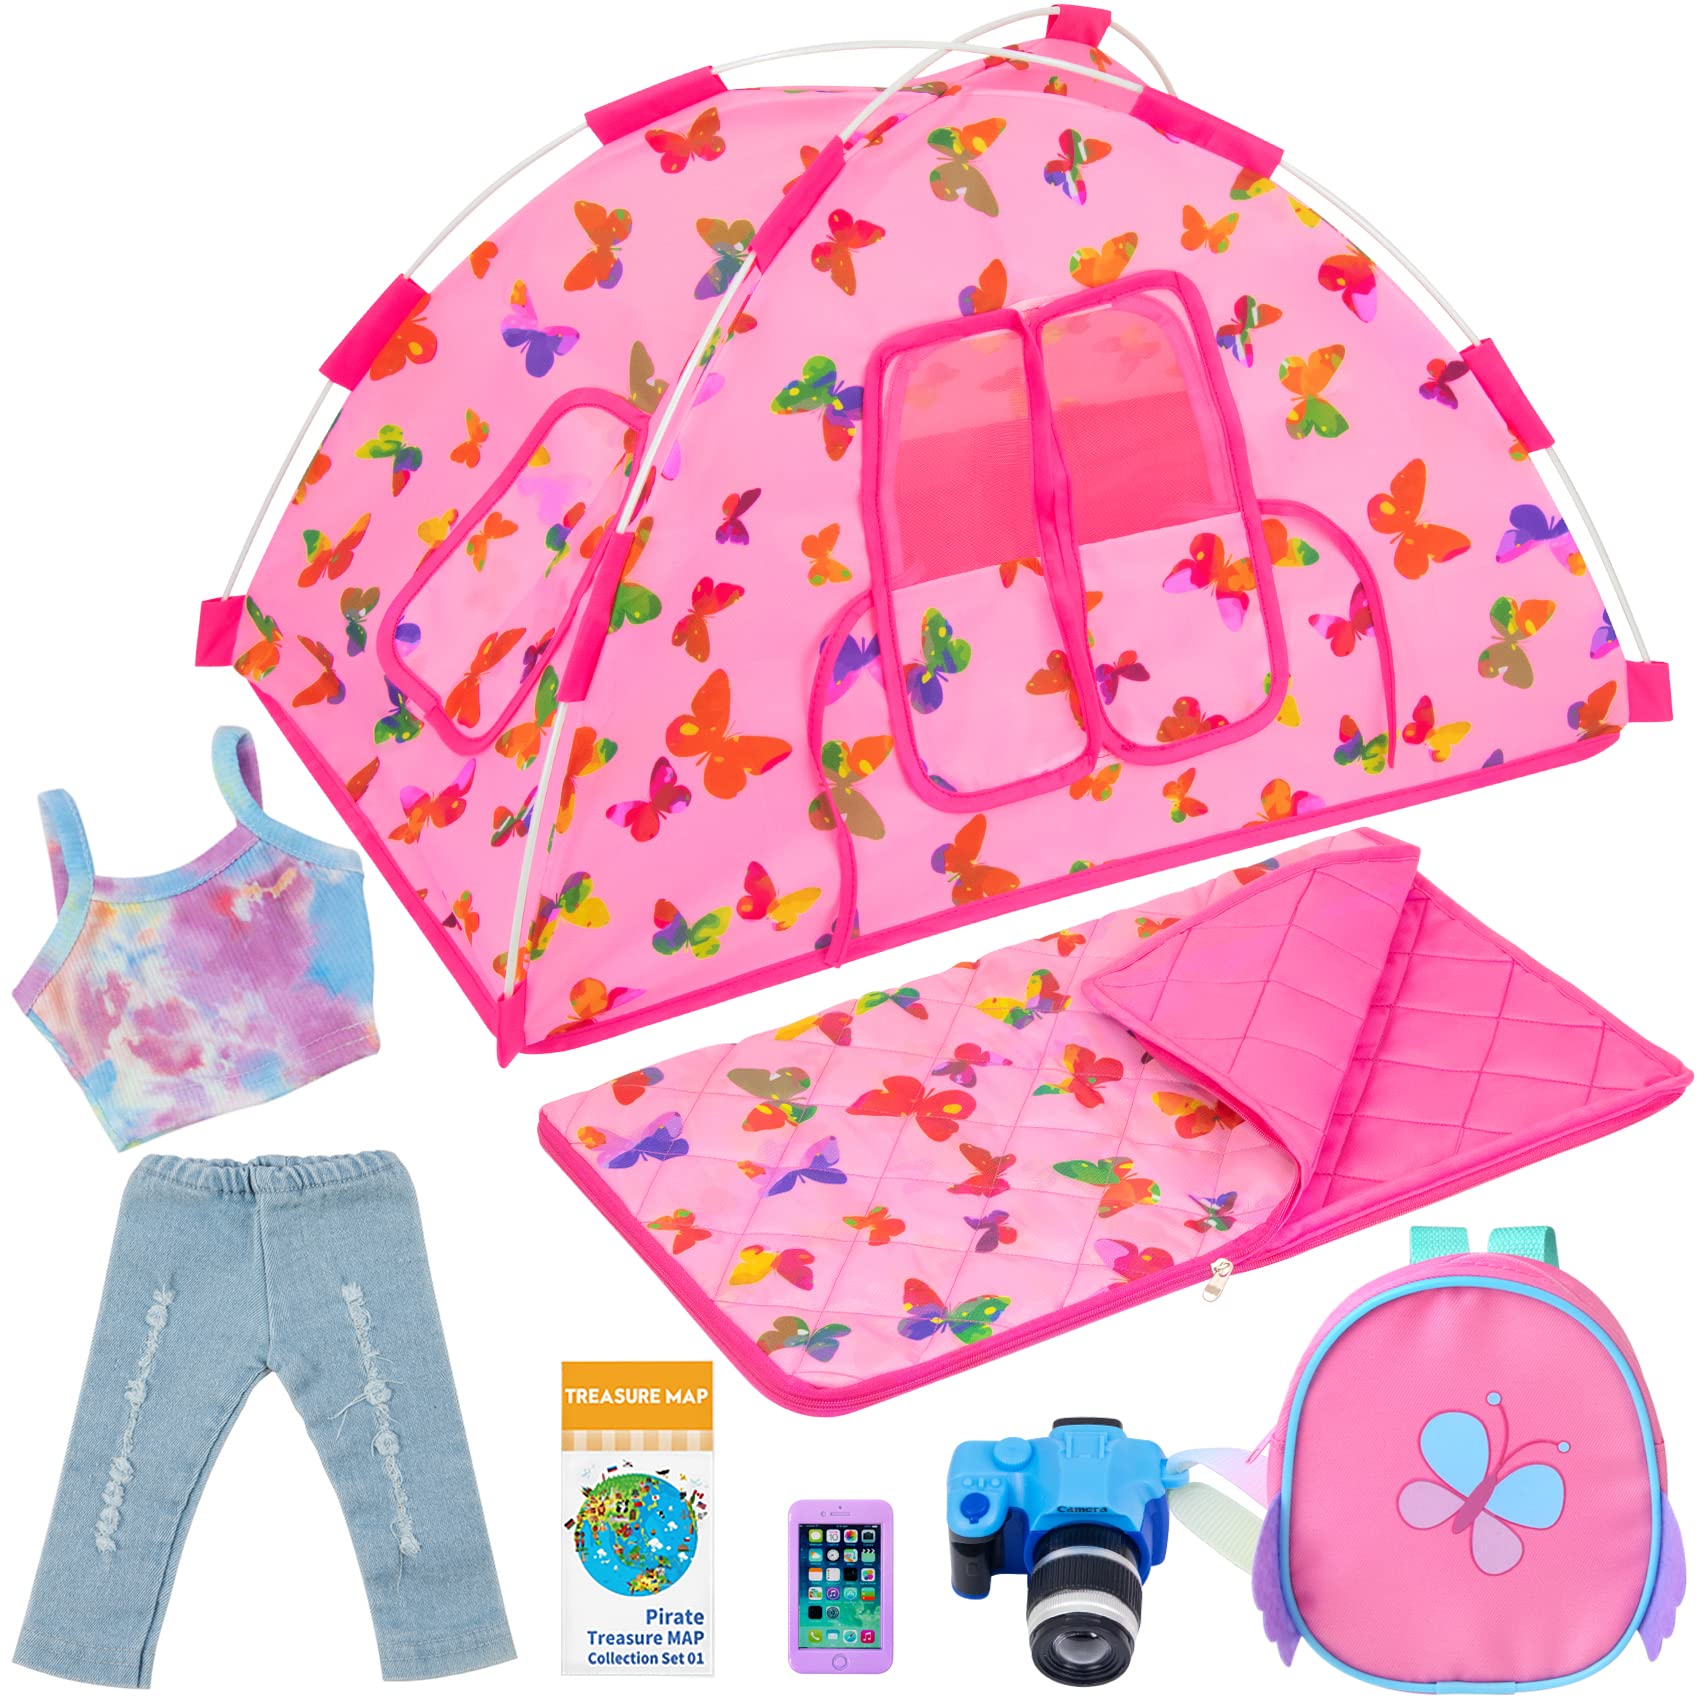 UNICORN ELEMENT 7 Items Doll Camping Tent Set for18 Inch Girl Doll Accessories - Including 18 Inch Doll Clothes, Tent, Sleeping Bag, Backpack, Camera, Phone and Map